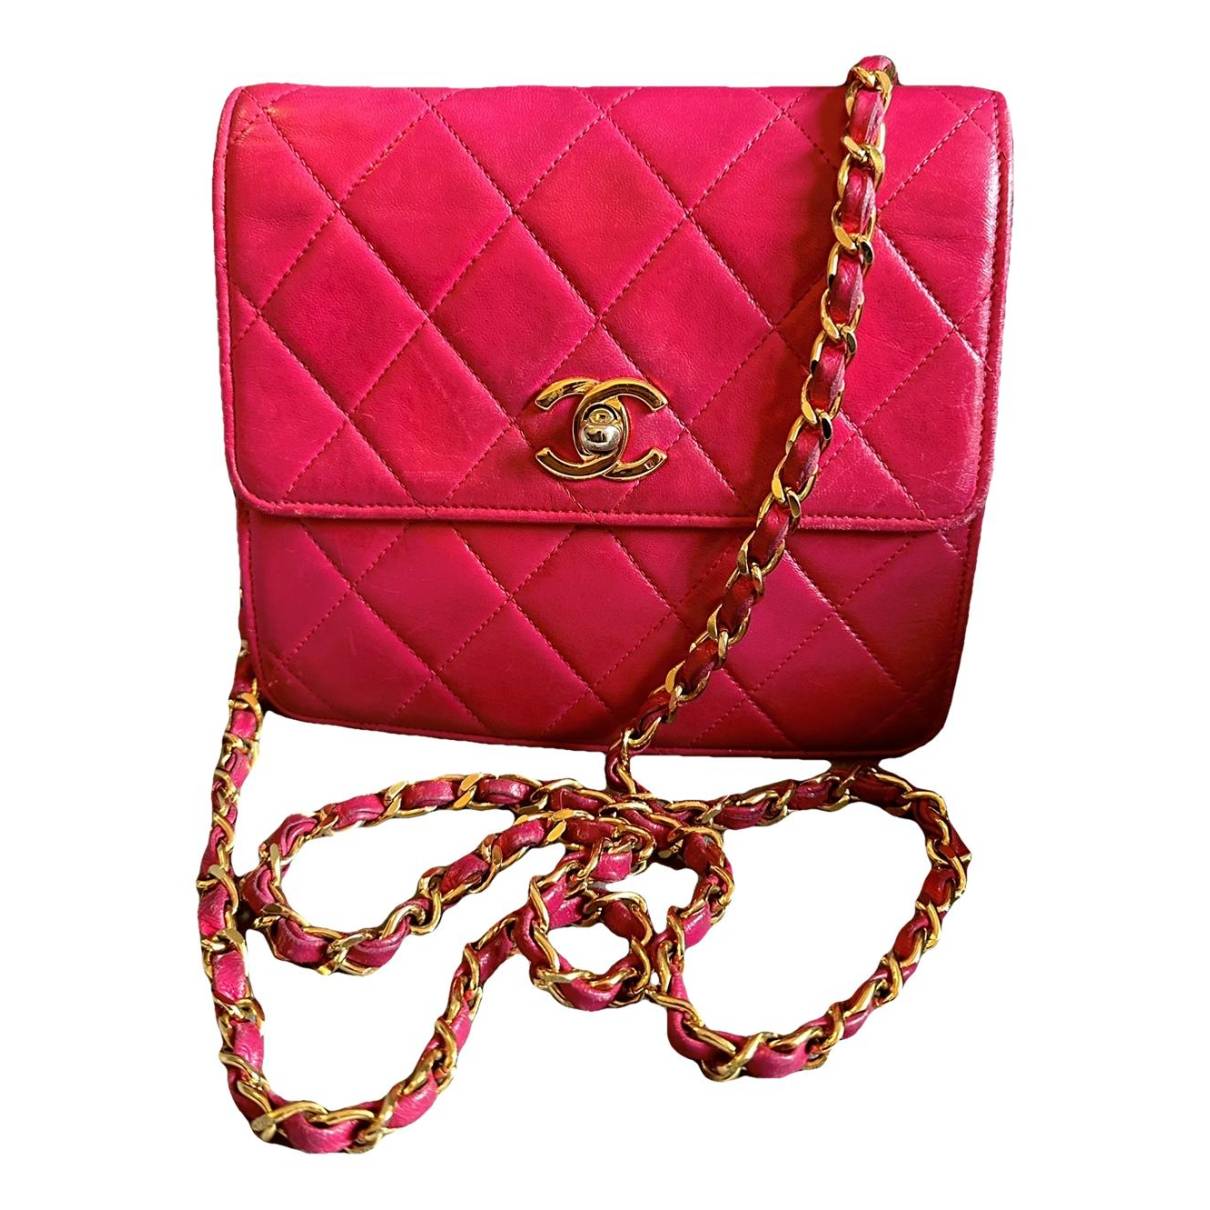 Timeless/classique leather crossbody bag Chanel Pink in Leather - 38723086